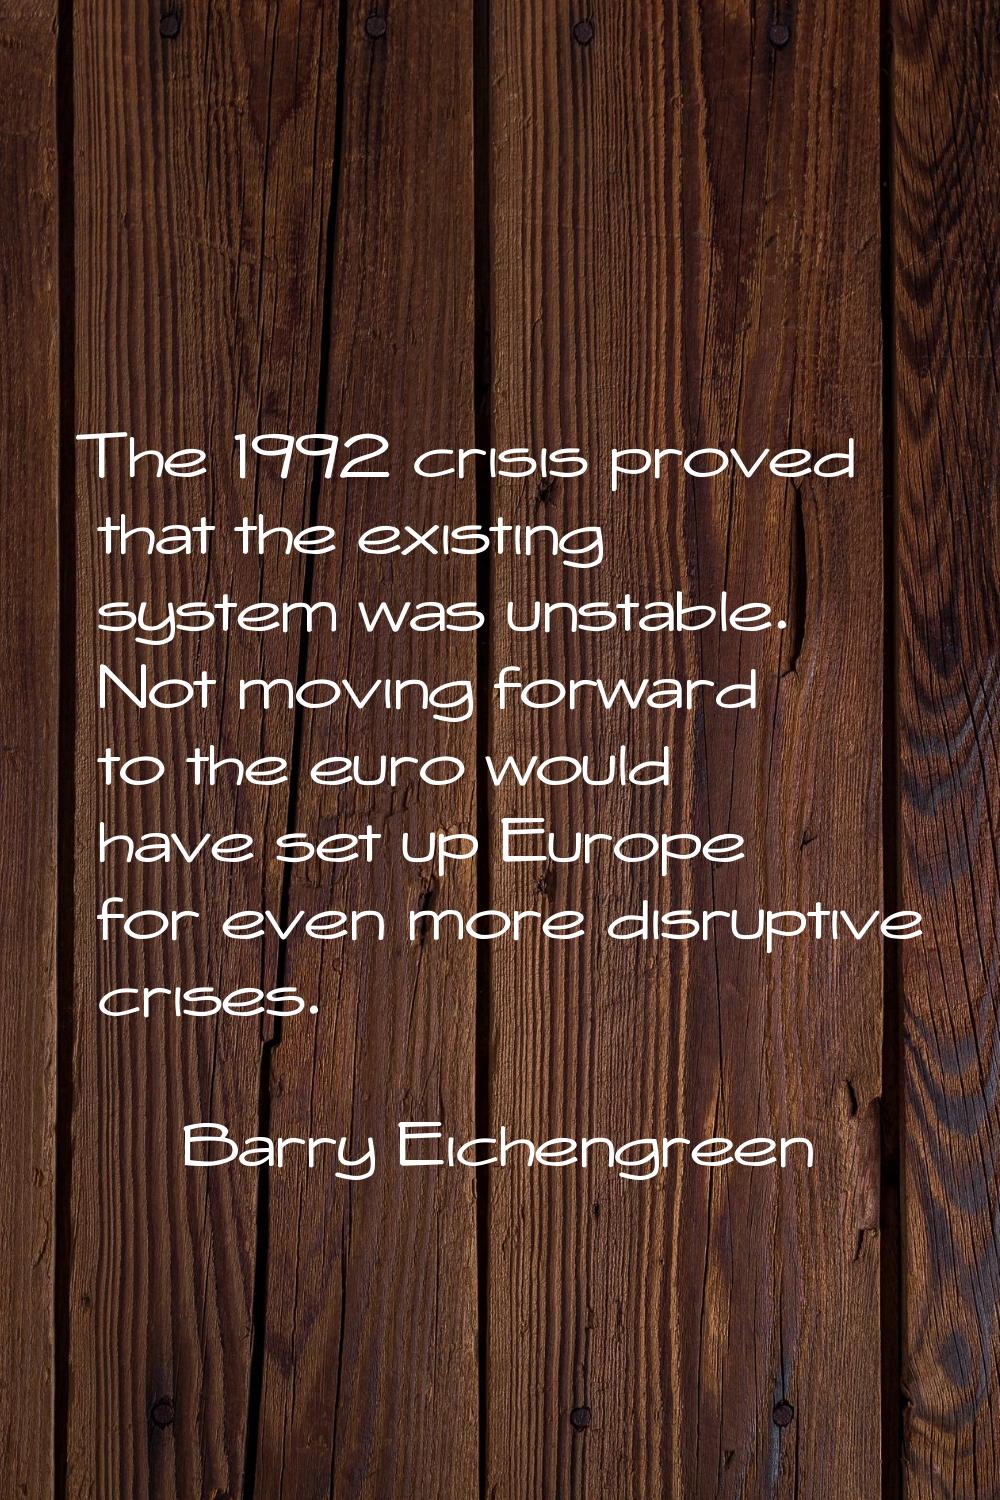 The 1992 crisis proved that the existing system was unstable. Not moving forward to the euro would 